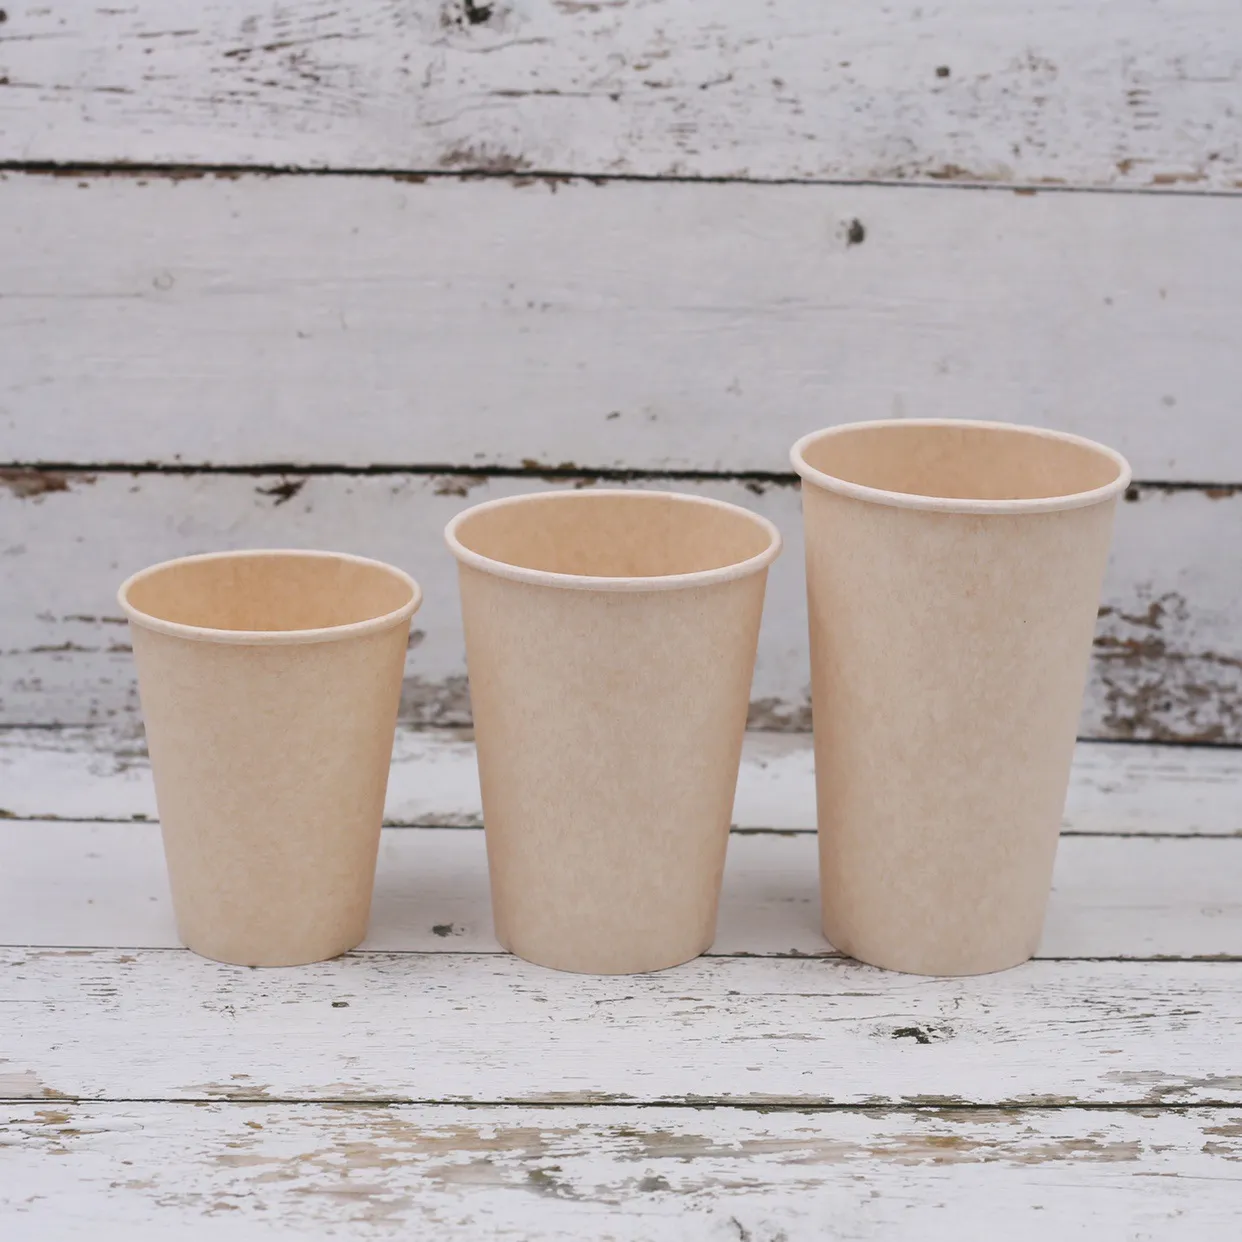 custom printed paper coffee cups paper cup biodegradable disposable paper coffee cups